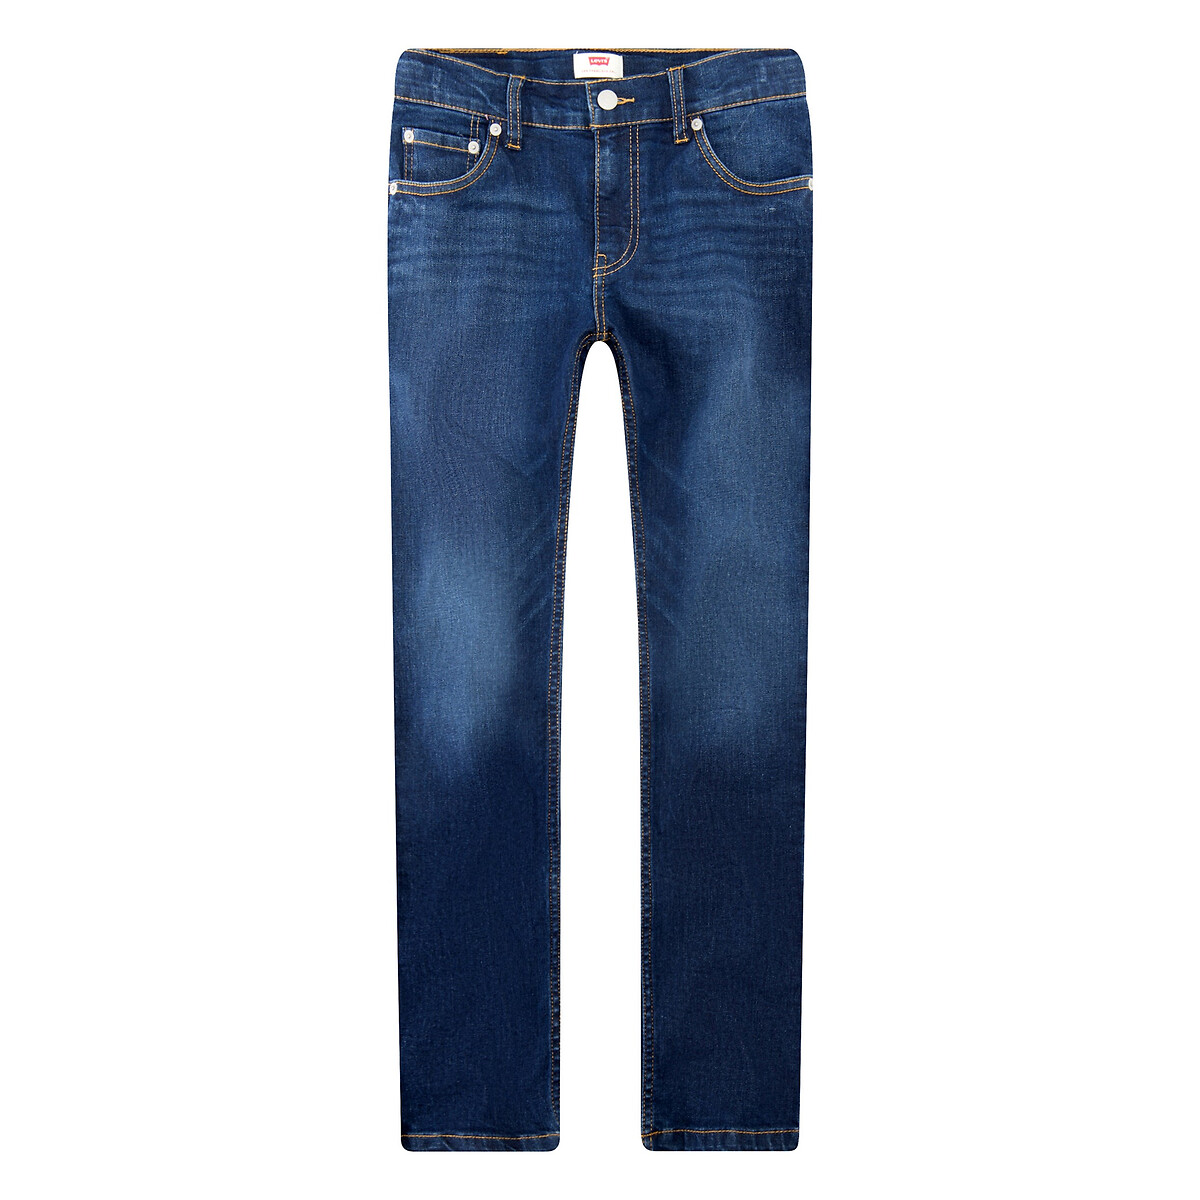 510 Skinny Fit Jeans, Mid Rise 3-16 Years